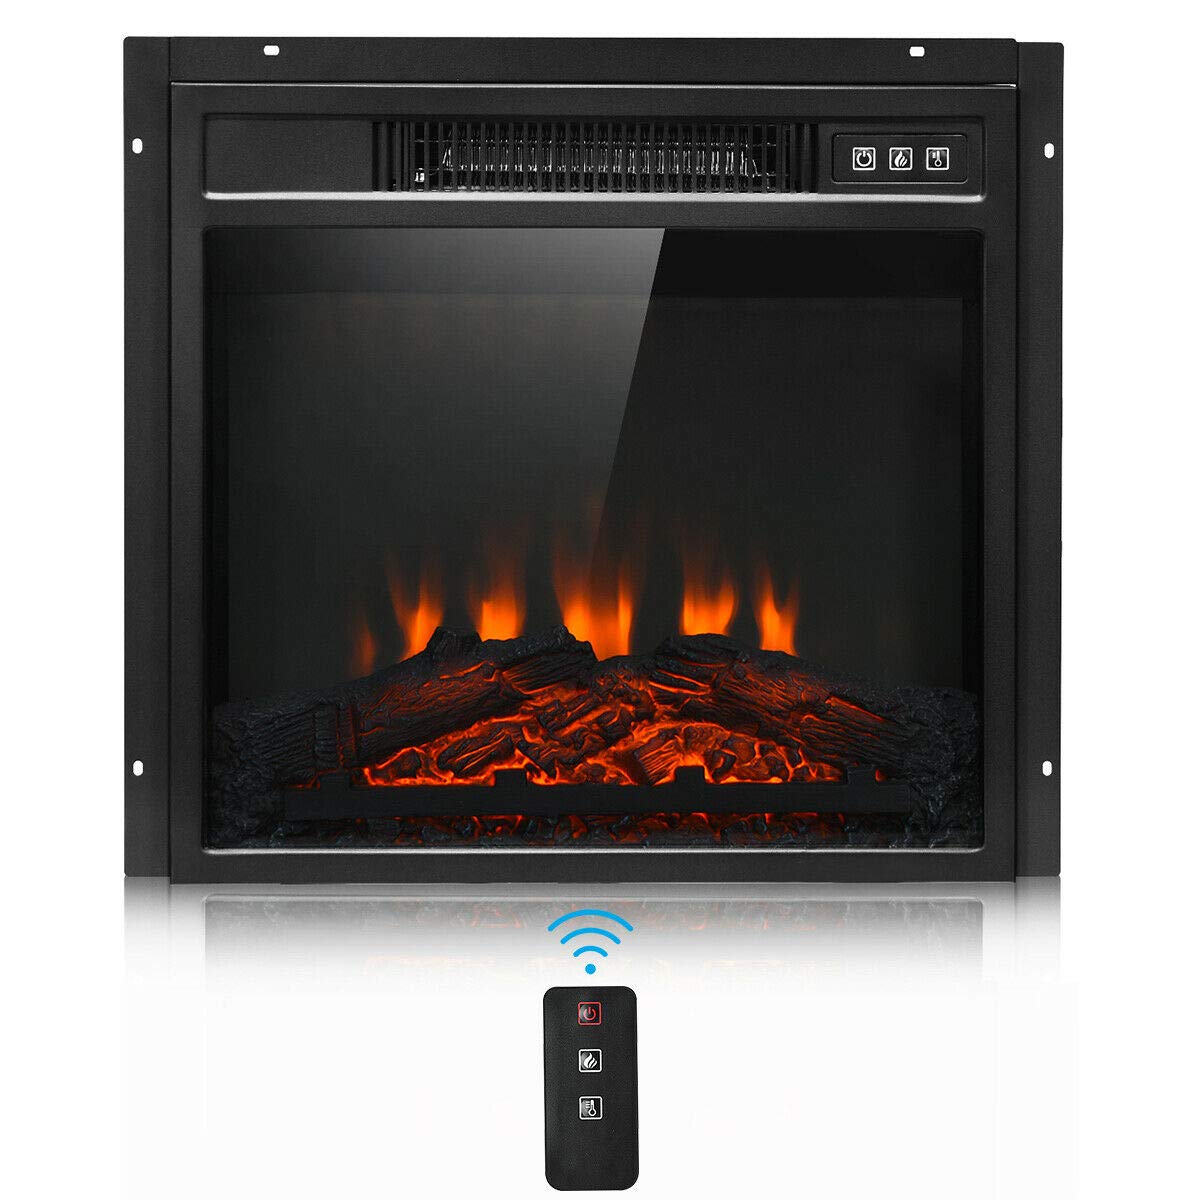 18"x17" 1400W Freestanding Electric Fireplace Mantel Insert With Remote Control Wall-Mounted Heater Realistic Flame Effect 3 Levels Flame Brightness Can Place in TV Stand Operates With Or Without Heat